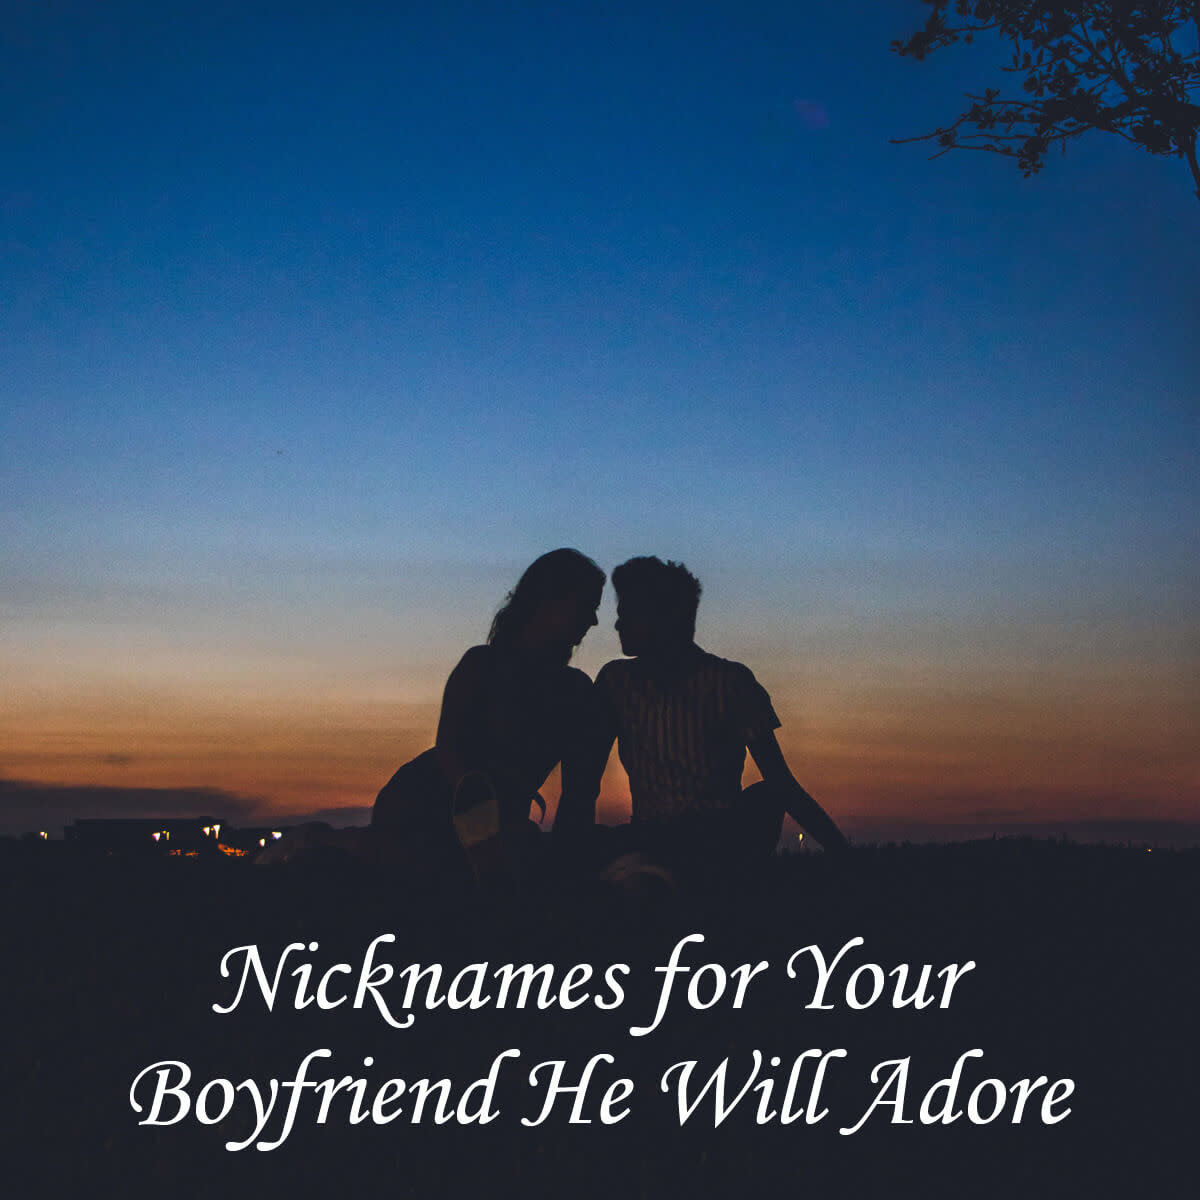 Nicknames for Your Boyfriend He Will Adore